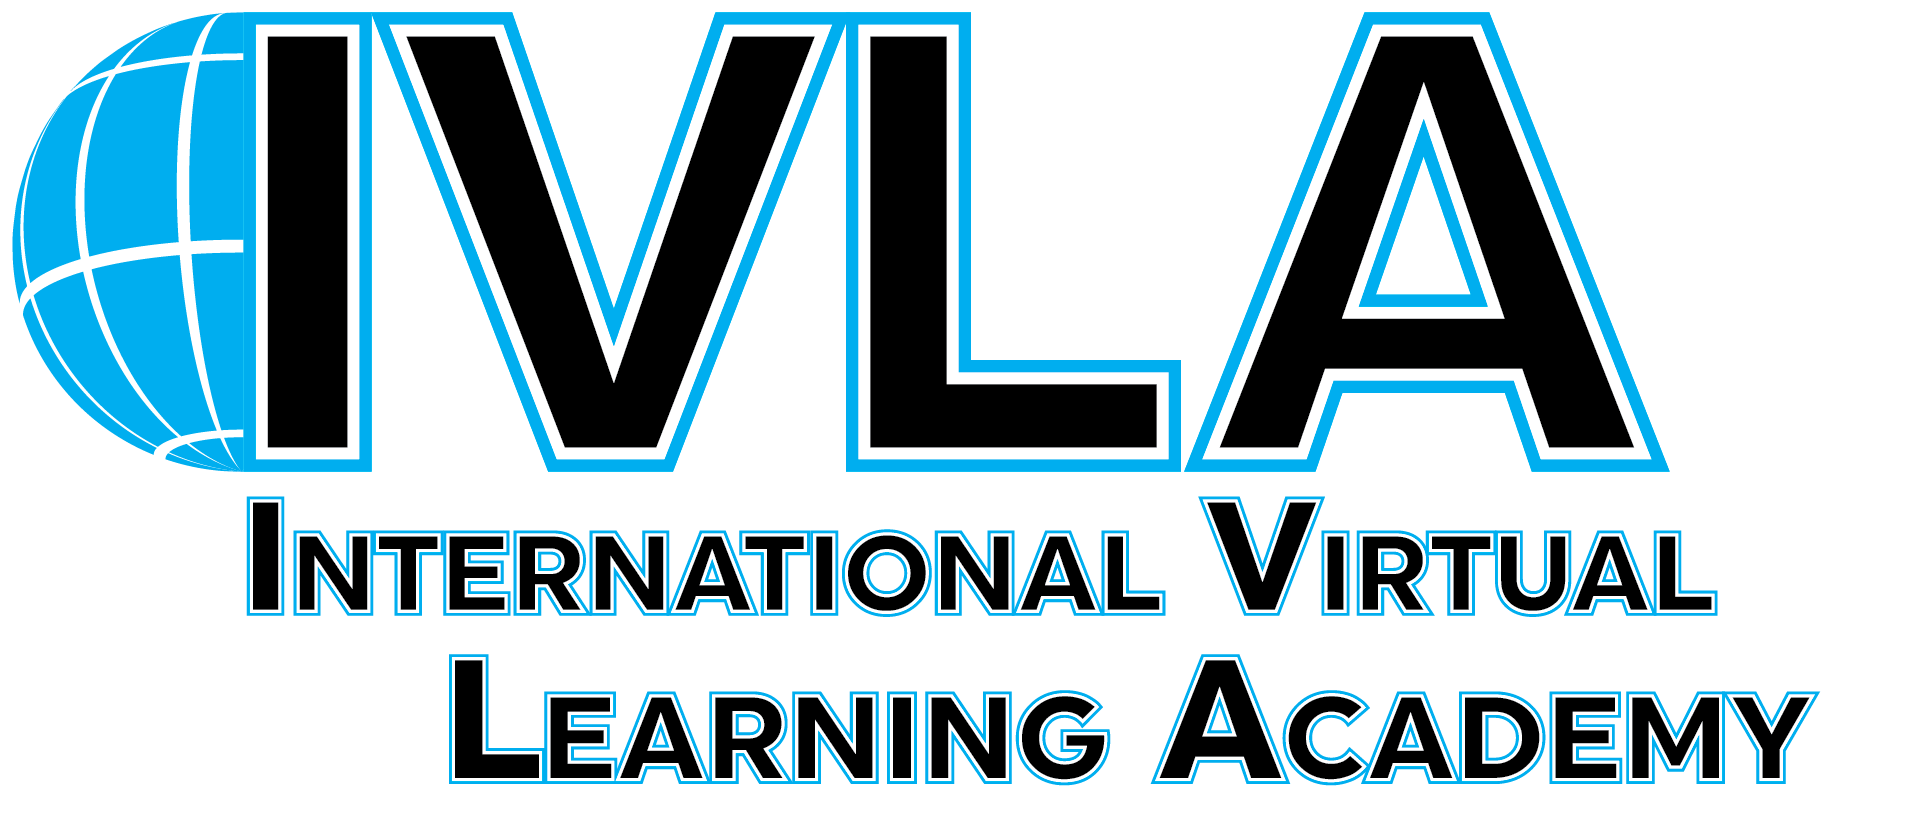 - Accelerate Learning - International Virtual Learning Academy